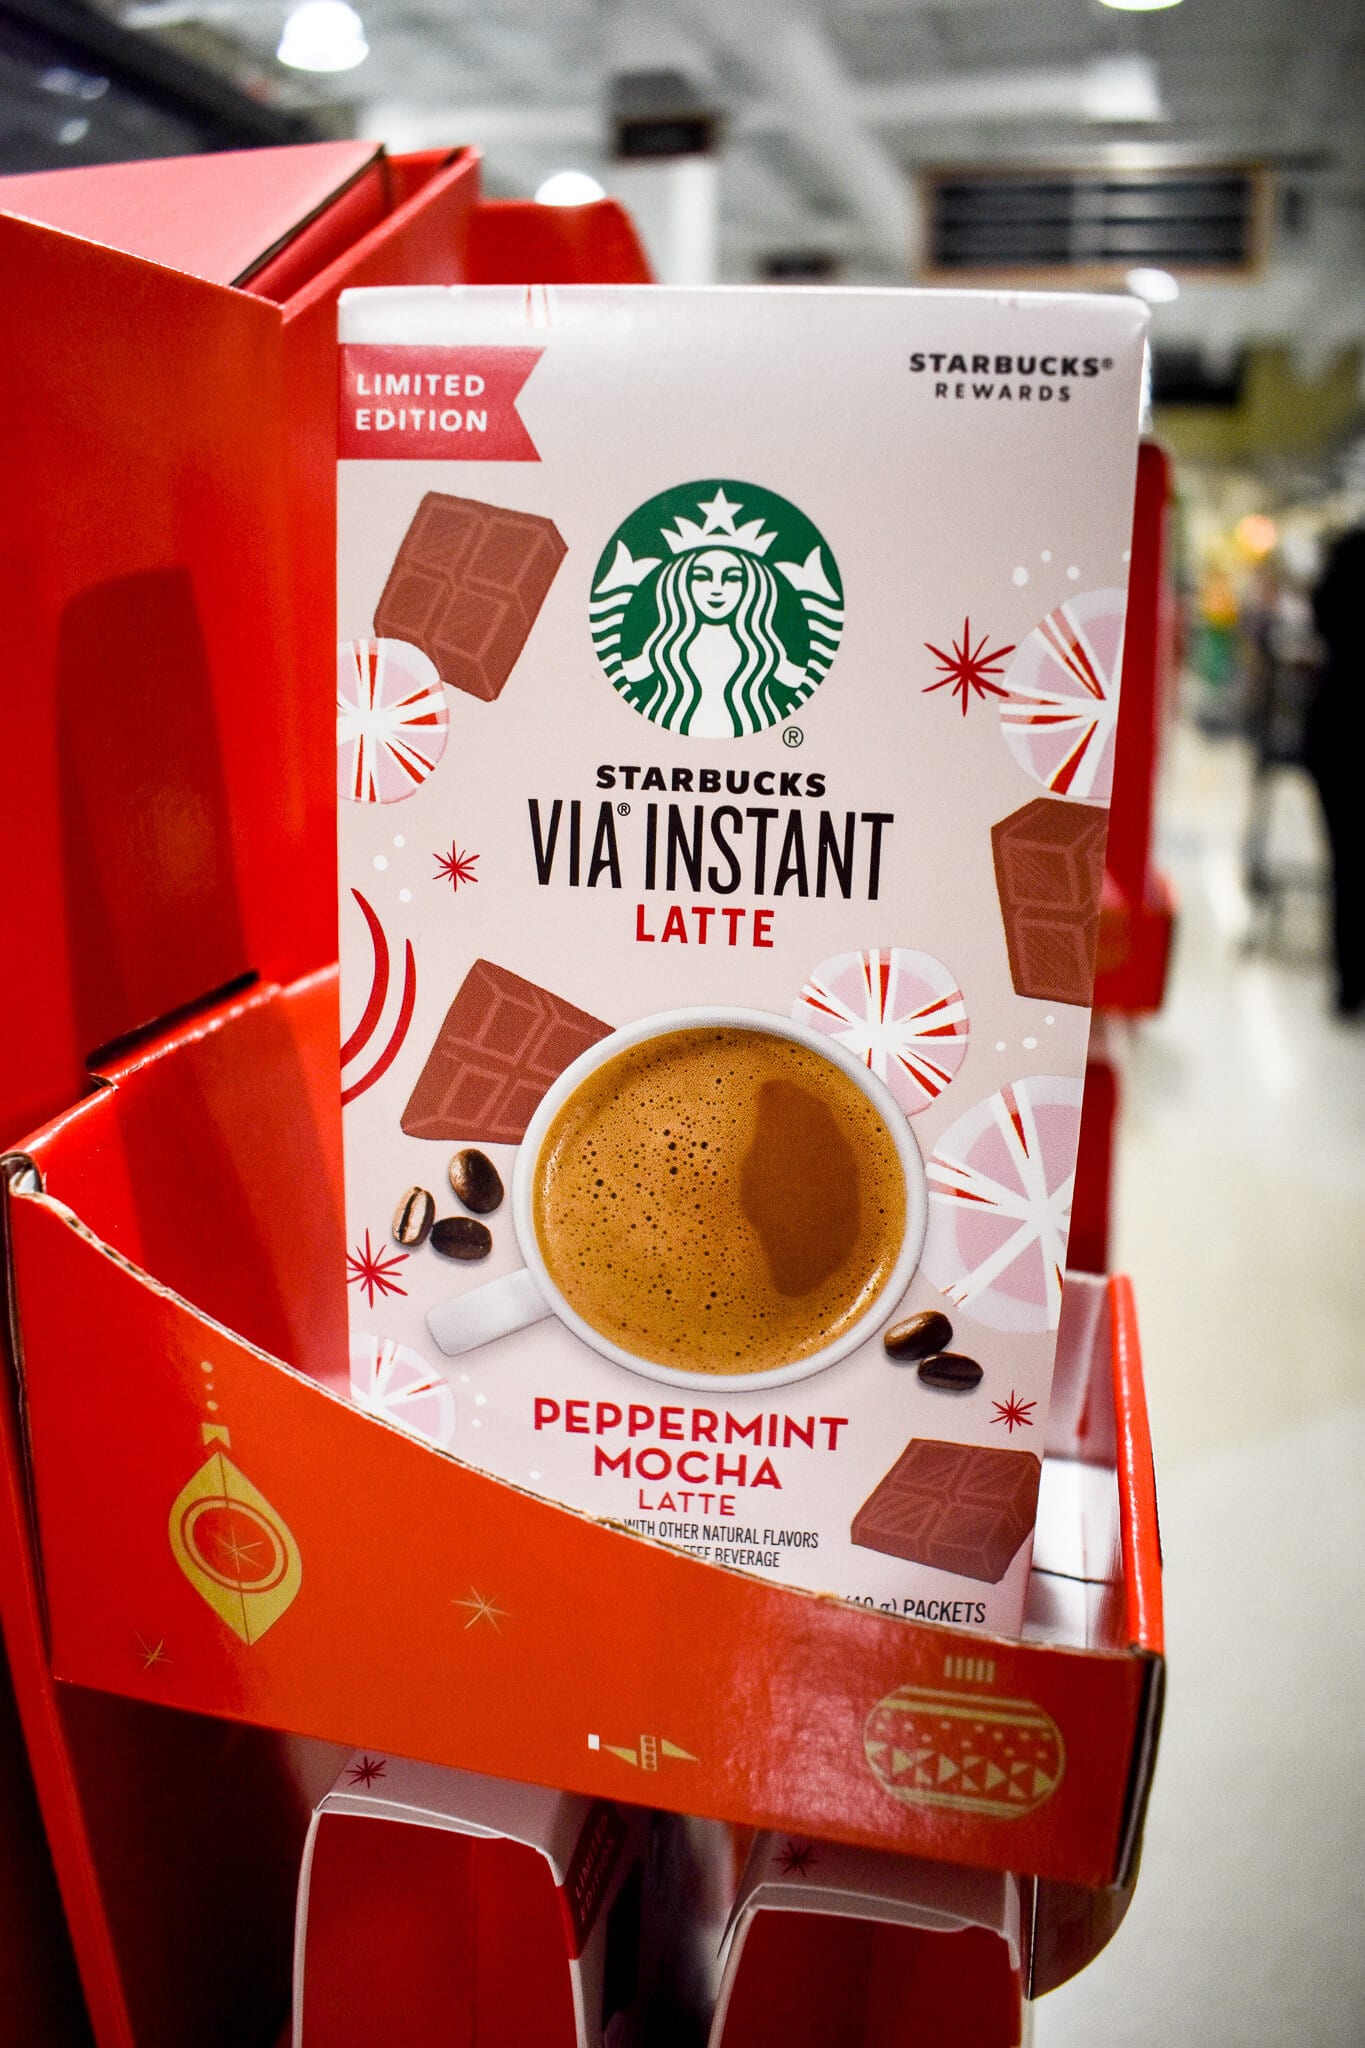 In a rush to get to work on time? Get the peppermint mocha latte instant packets and youll be set.